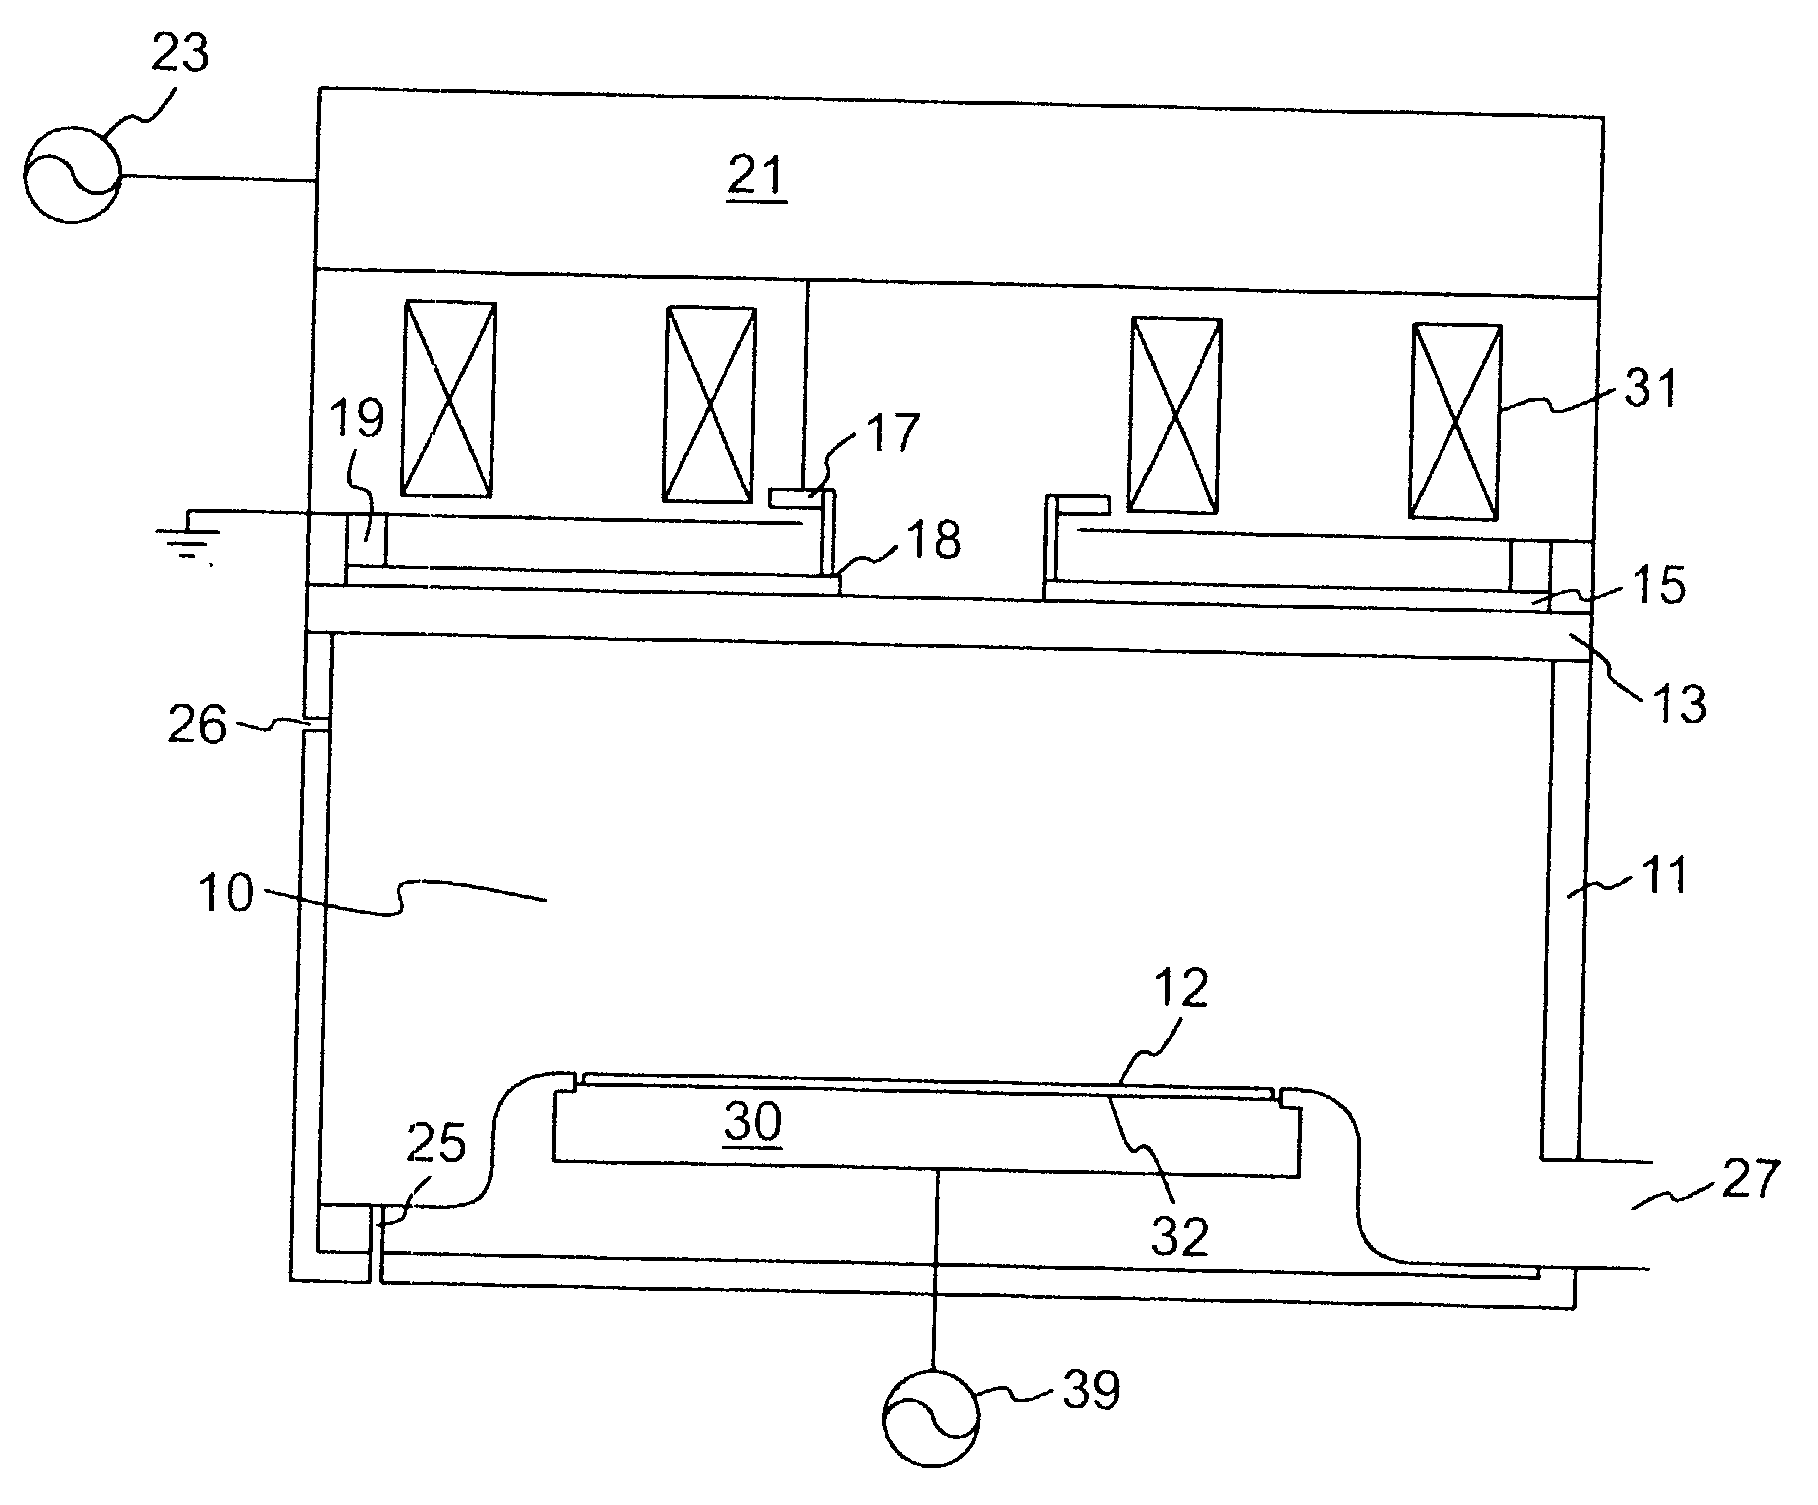 Plasma reactor with high selectivity and reduced damage